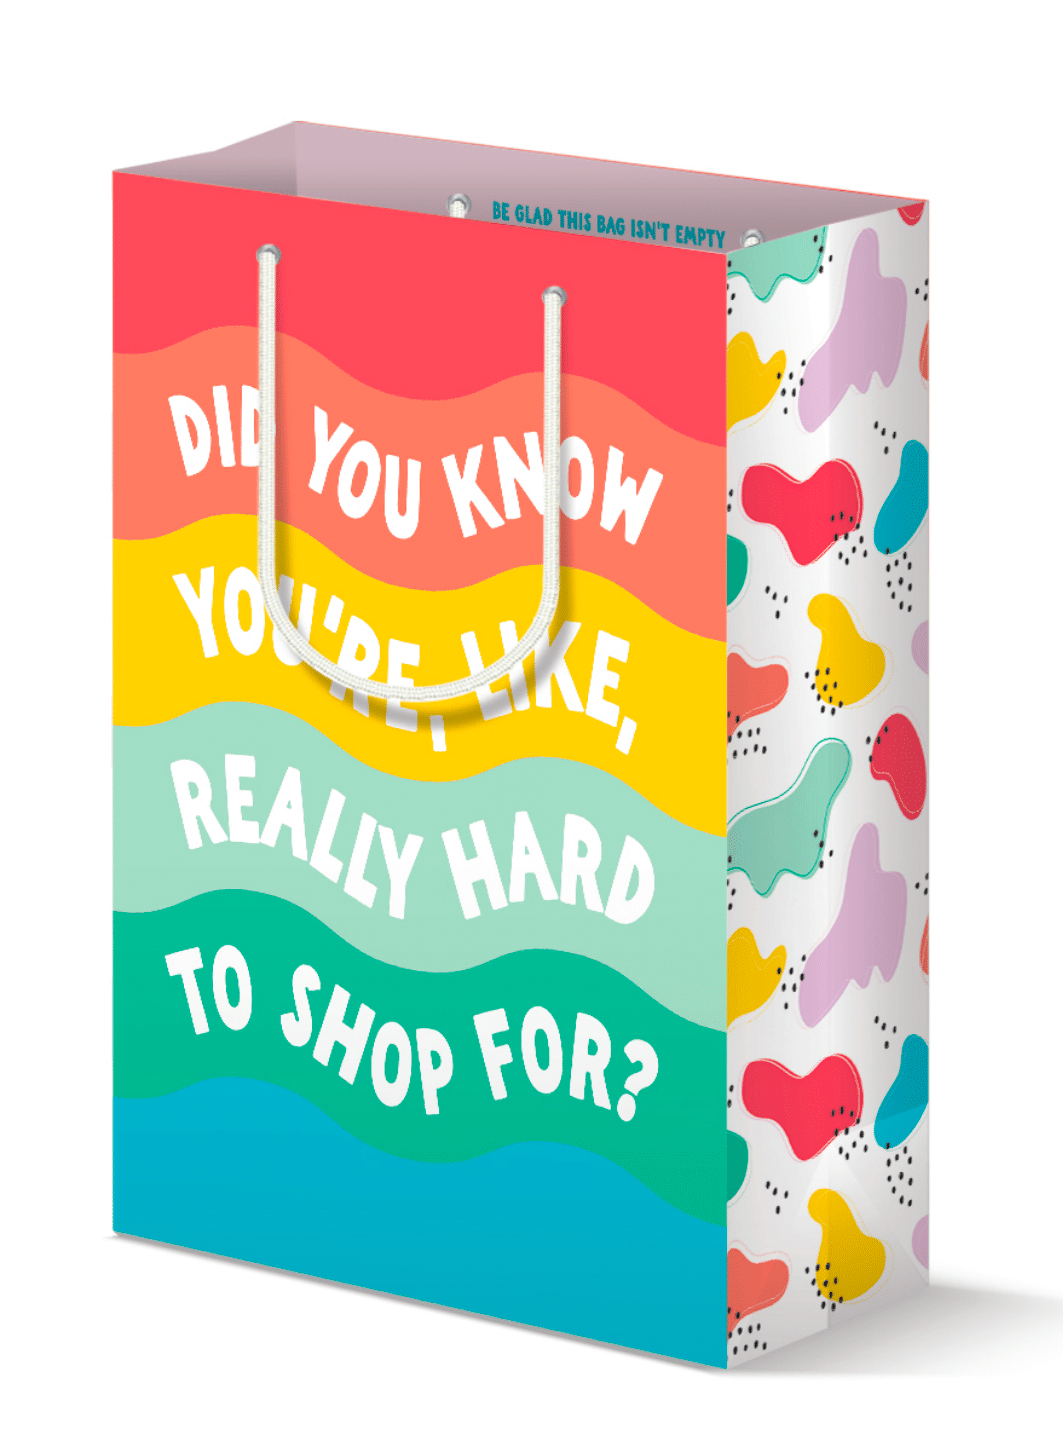 Did You Know You're Like Really Hard to Shop For? - Gift Bag